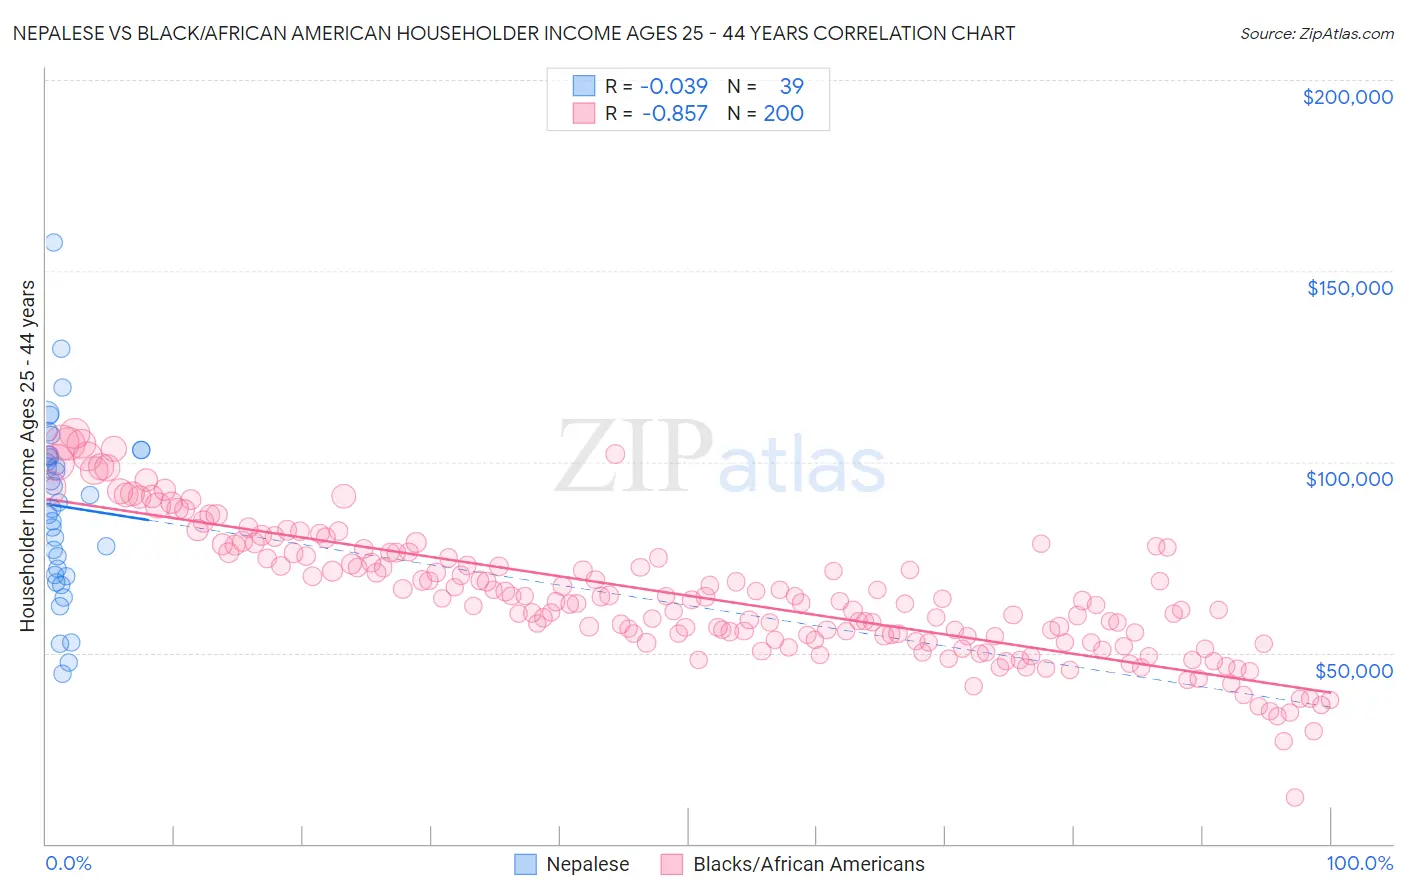 Nepalese vs Black/African American Householder Income Ages 25 - 44 years